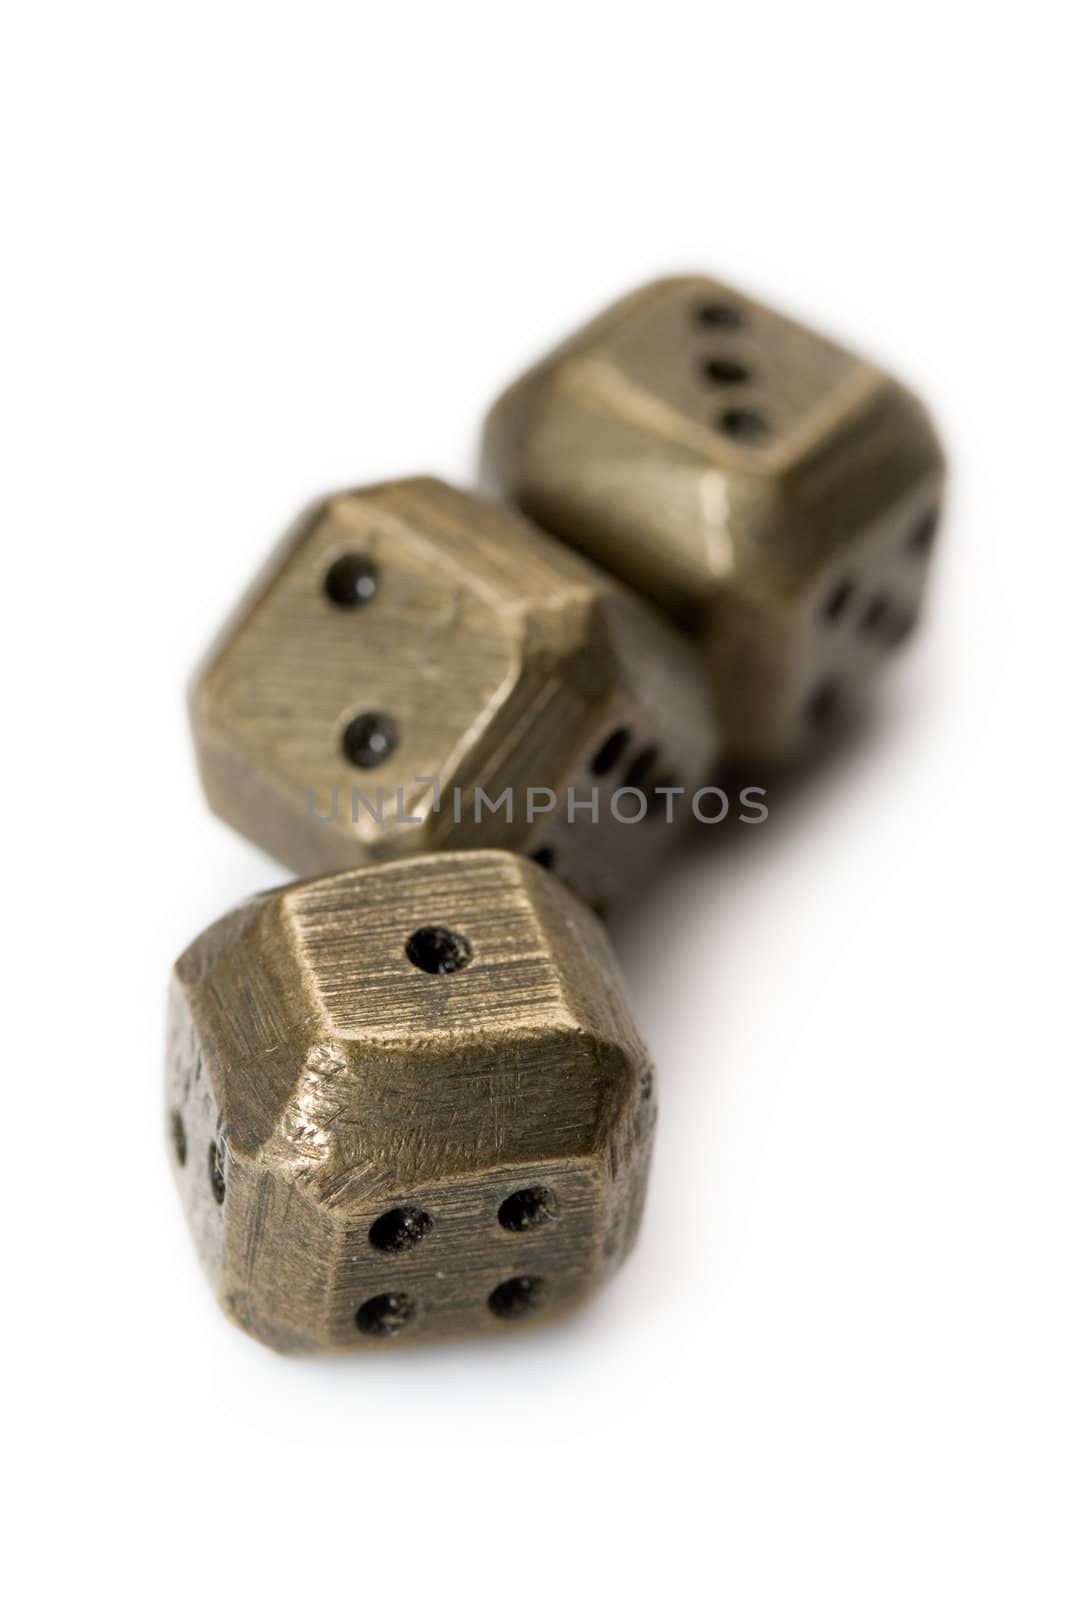 Dices isolated on white